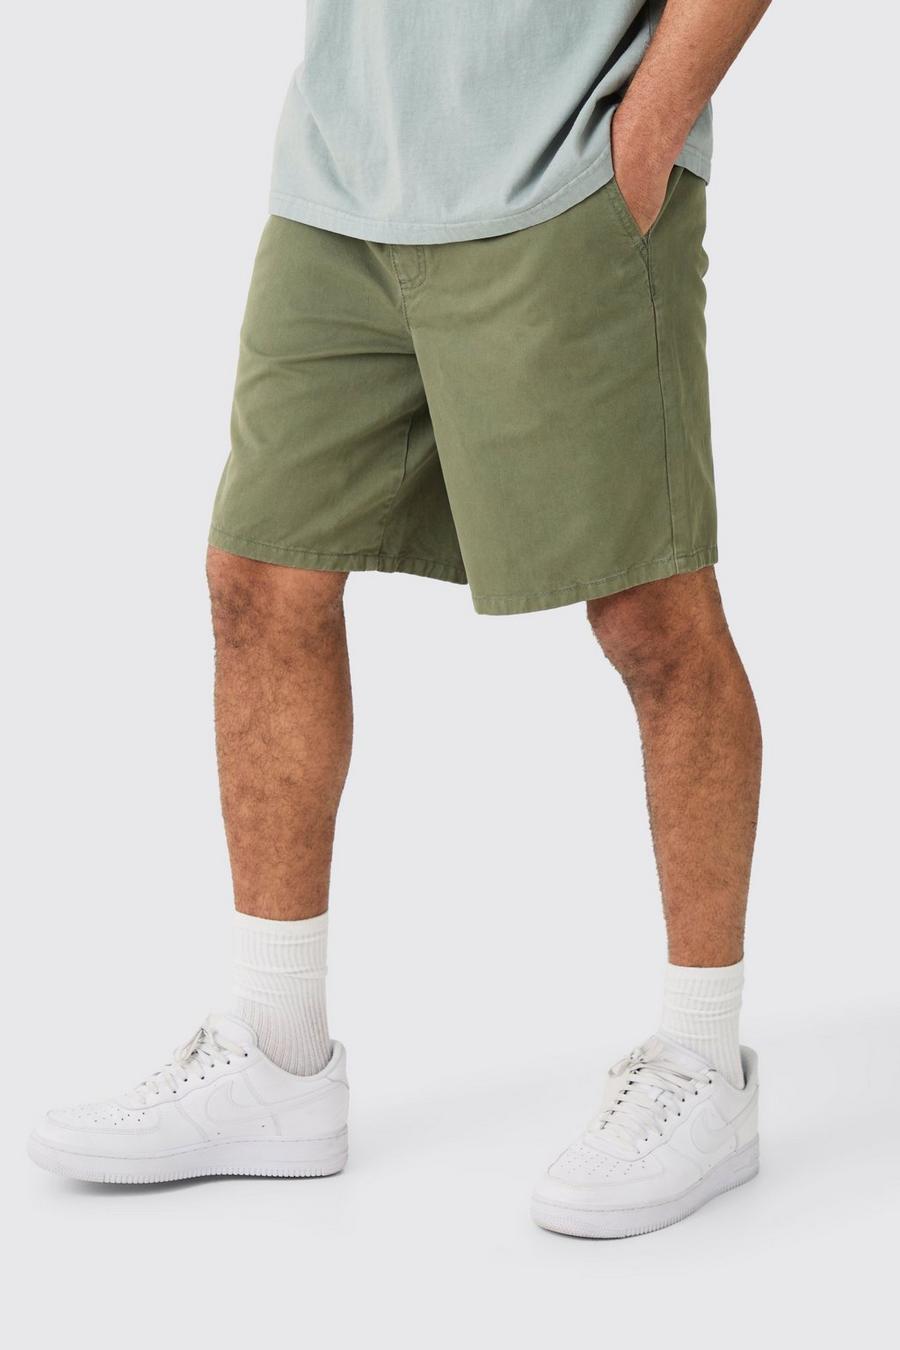 Relaxed Fit Elastic Waist Chino Shorts in Khaki